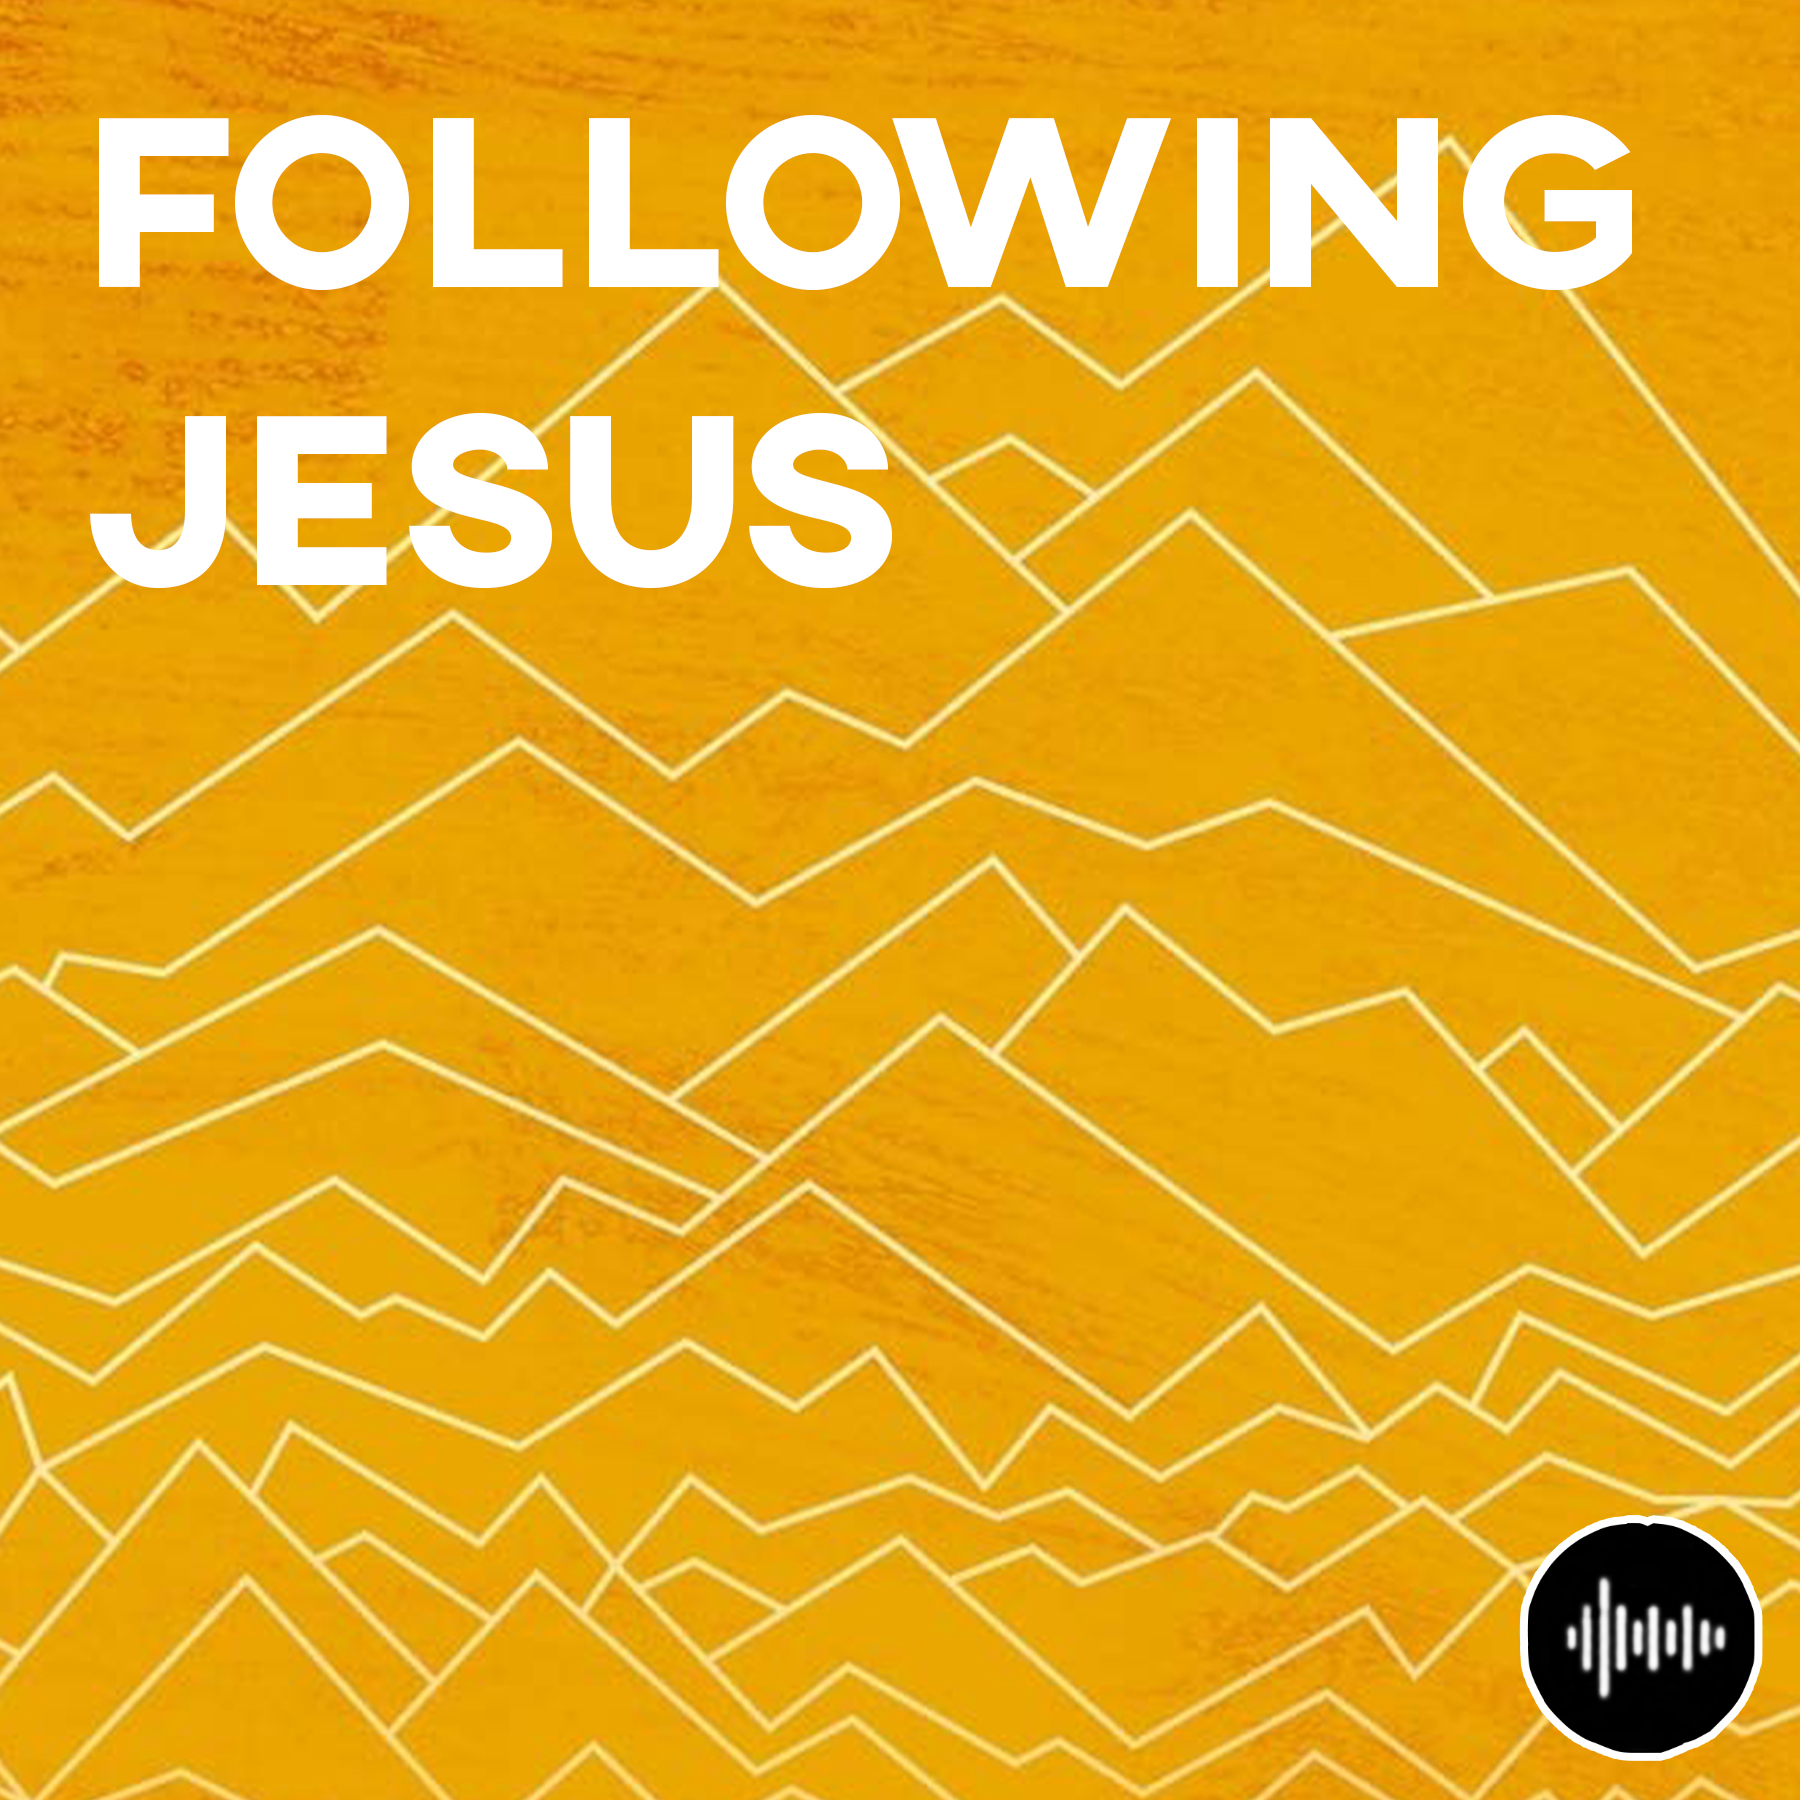 Following Jesus Part 2 - Loving And Obeying